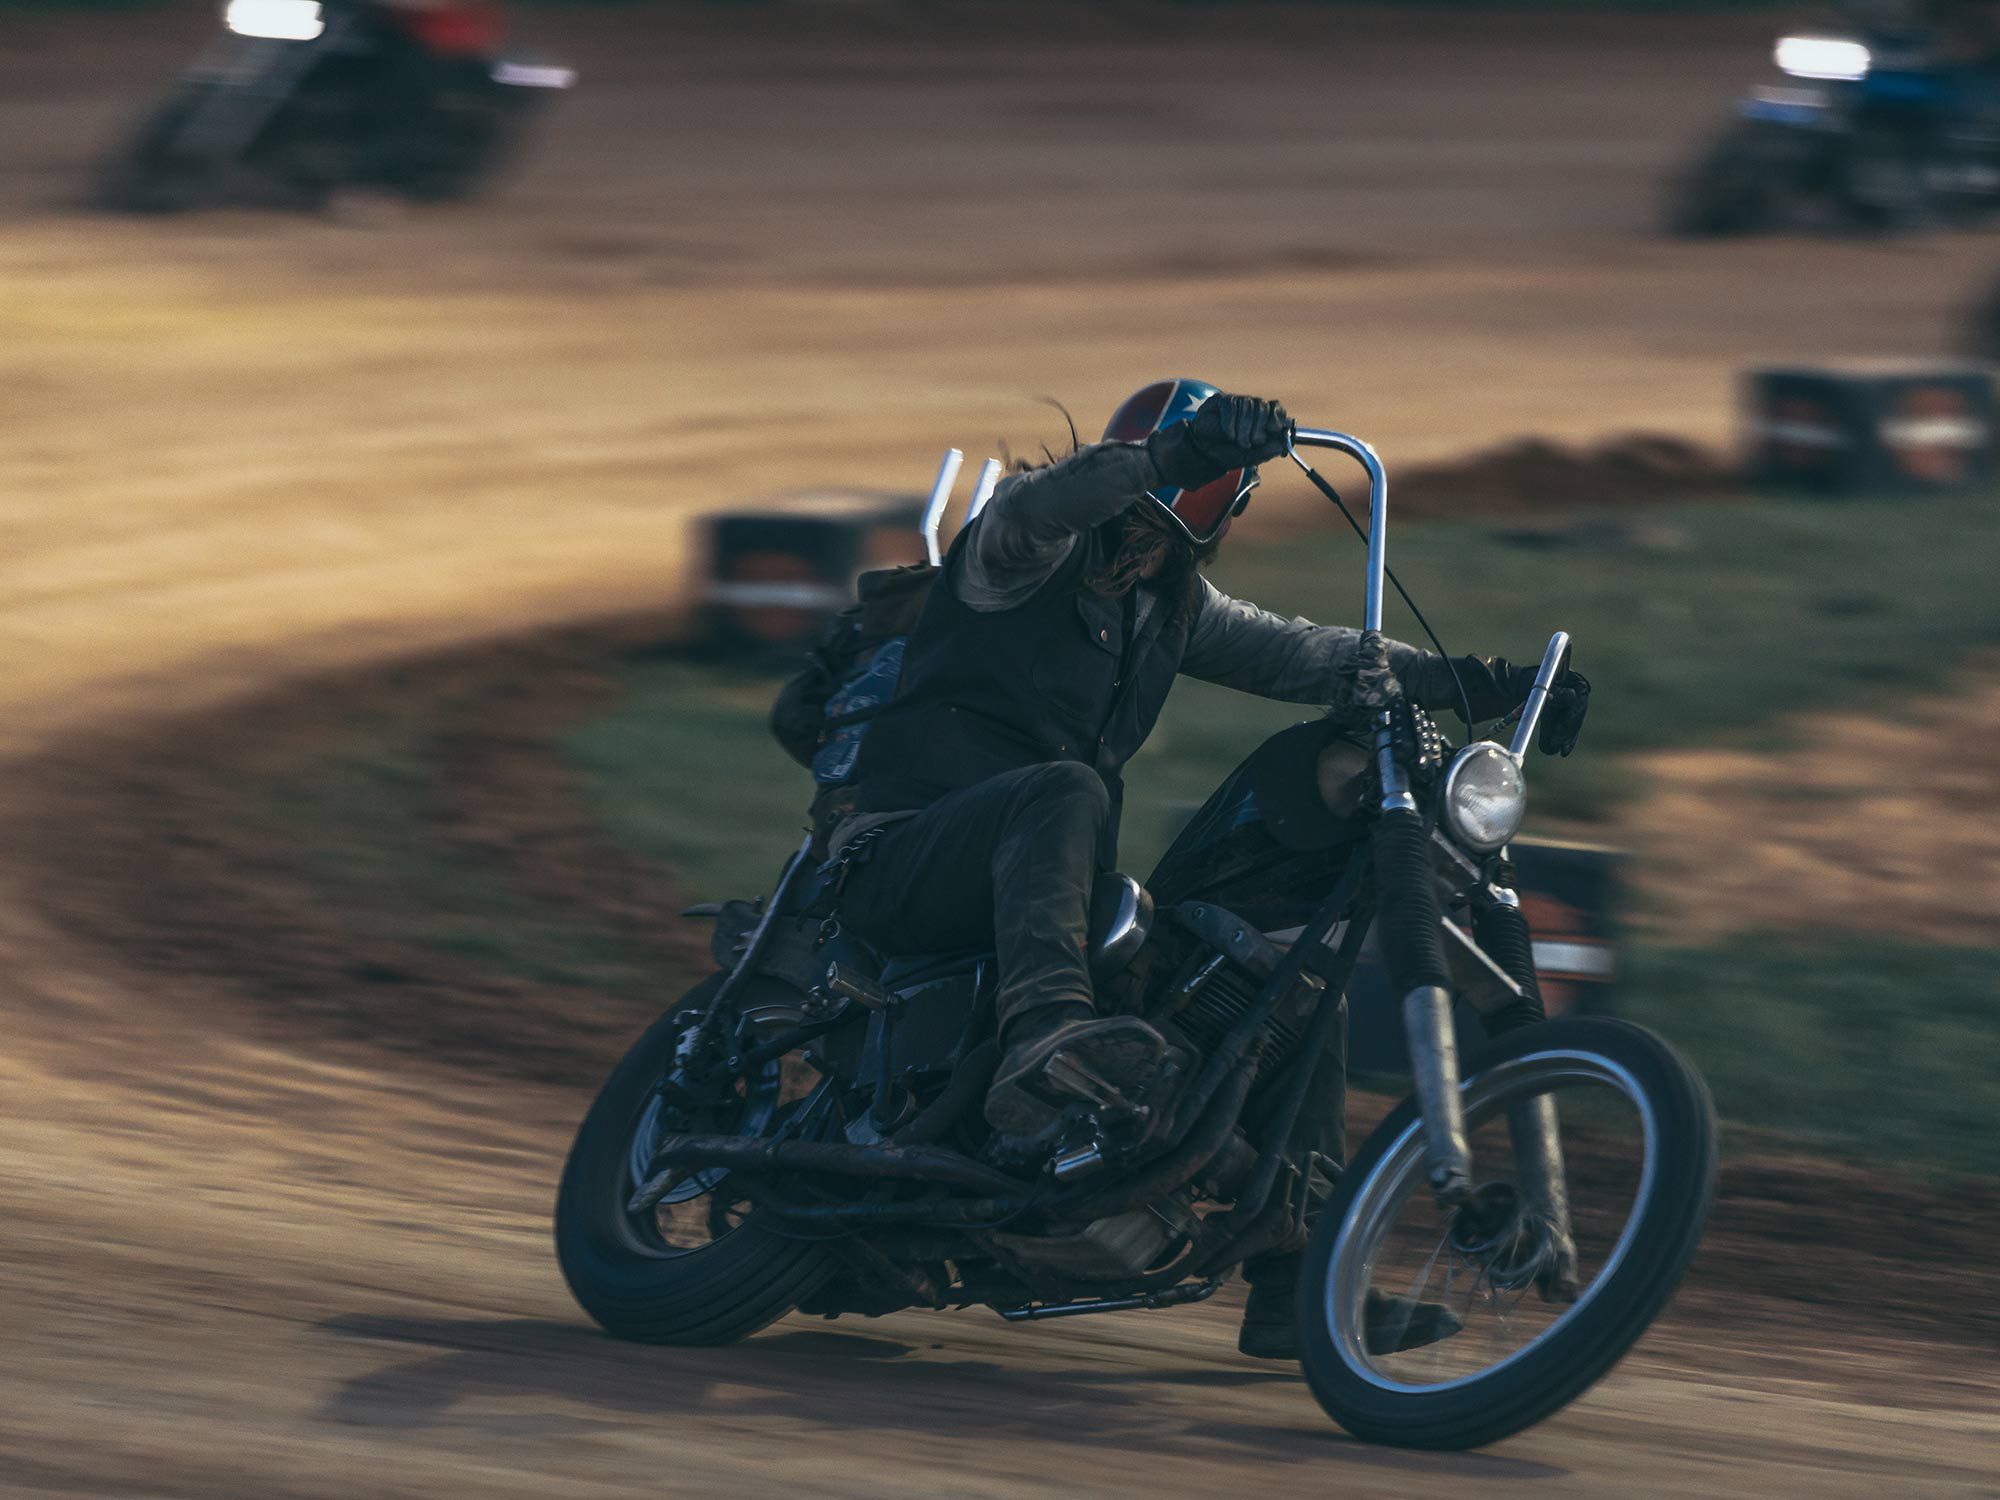 No front brake necessary, apehangers optional: dirt track contest at Sturgis.